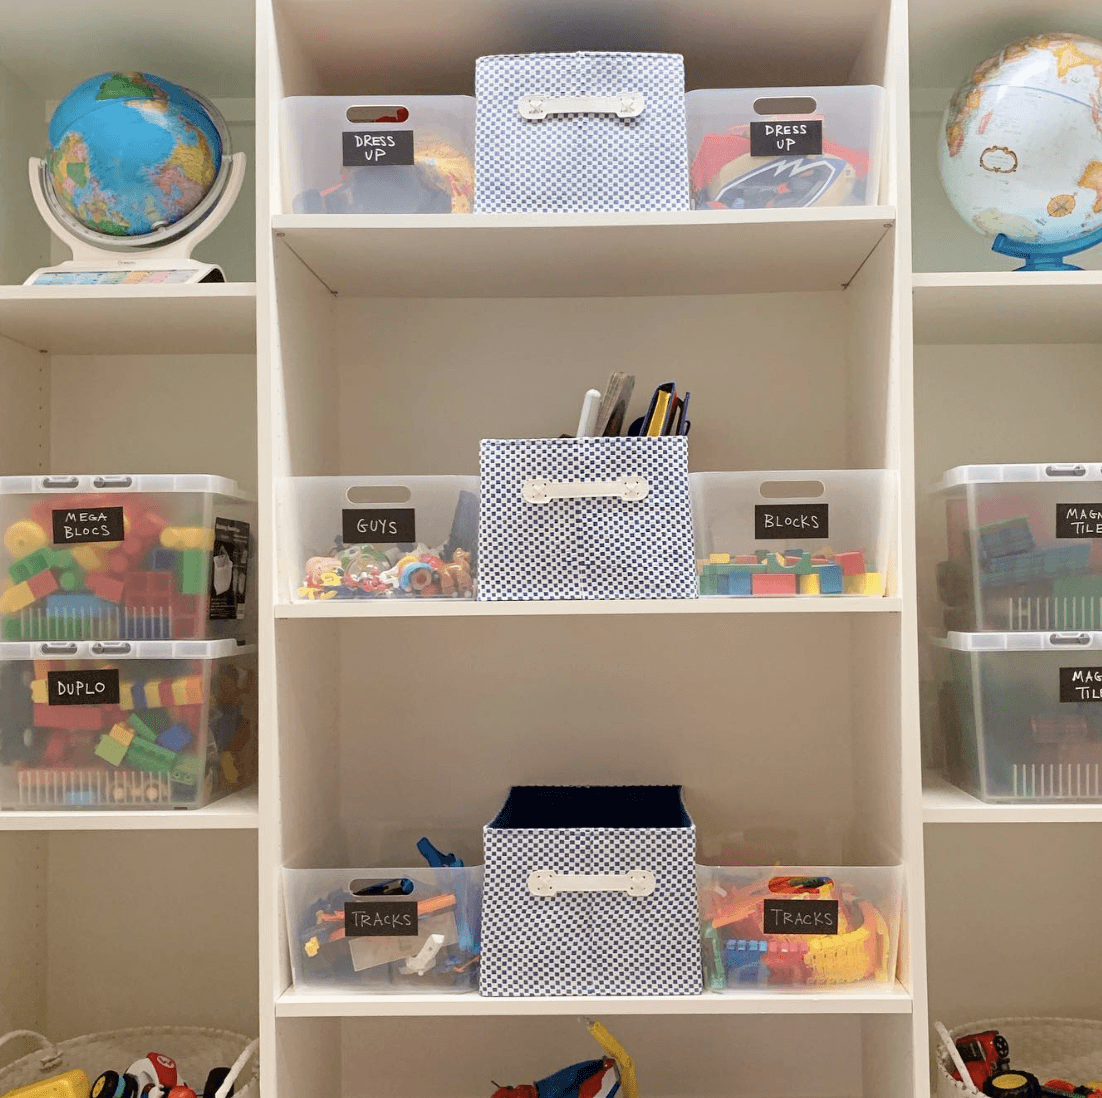 white shelving unit in basement with kids toys and labeled totes